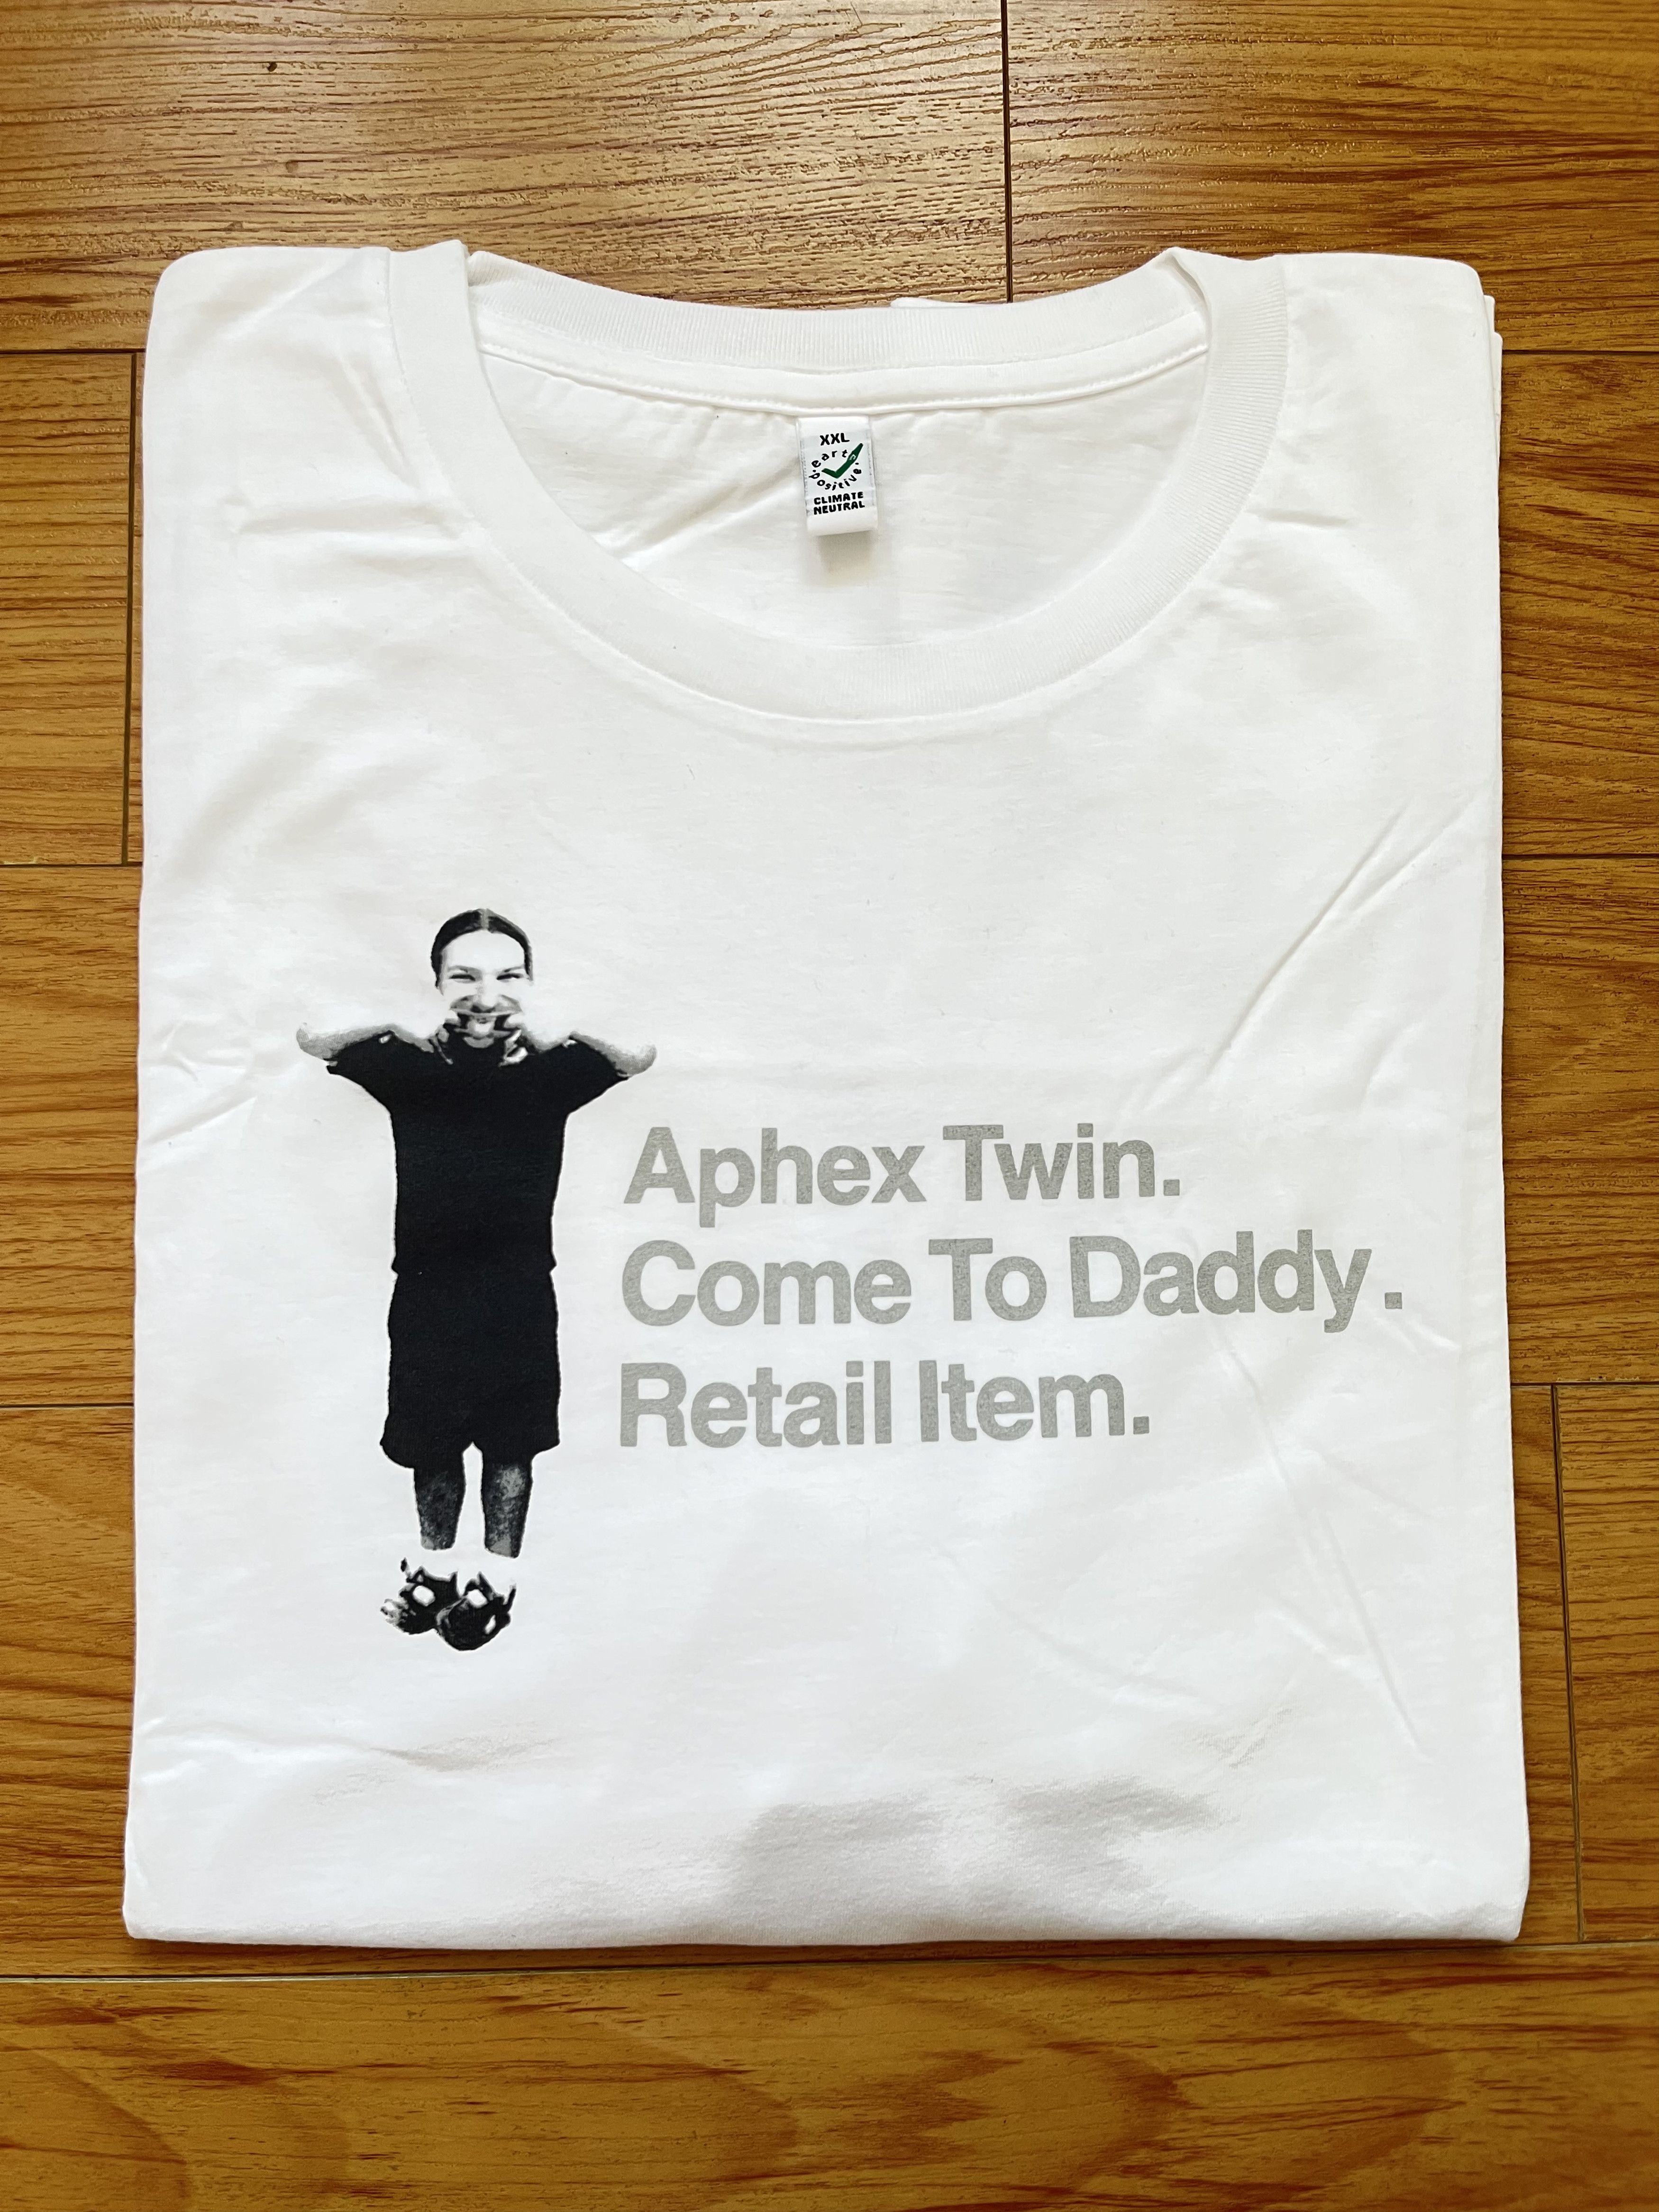 official USA outlet store Aphex twin come to daddy retail item t ...